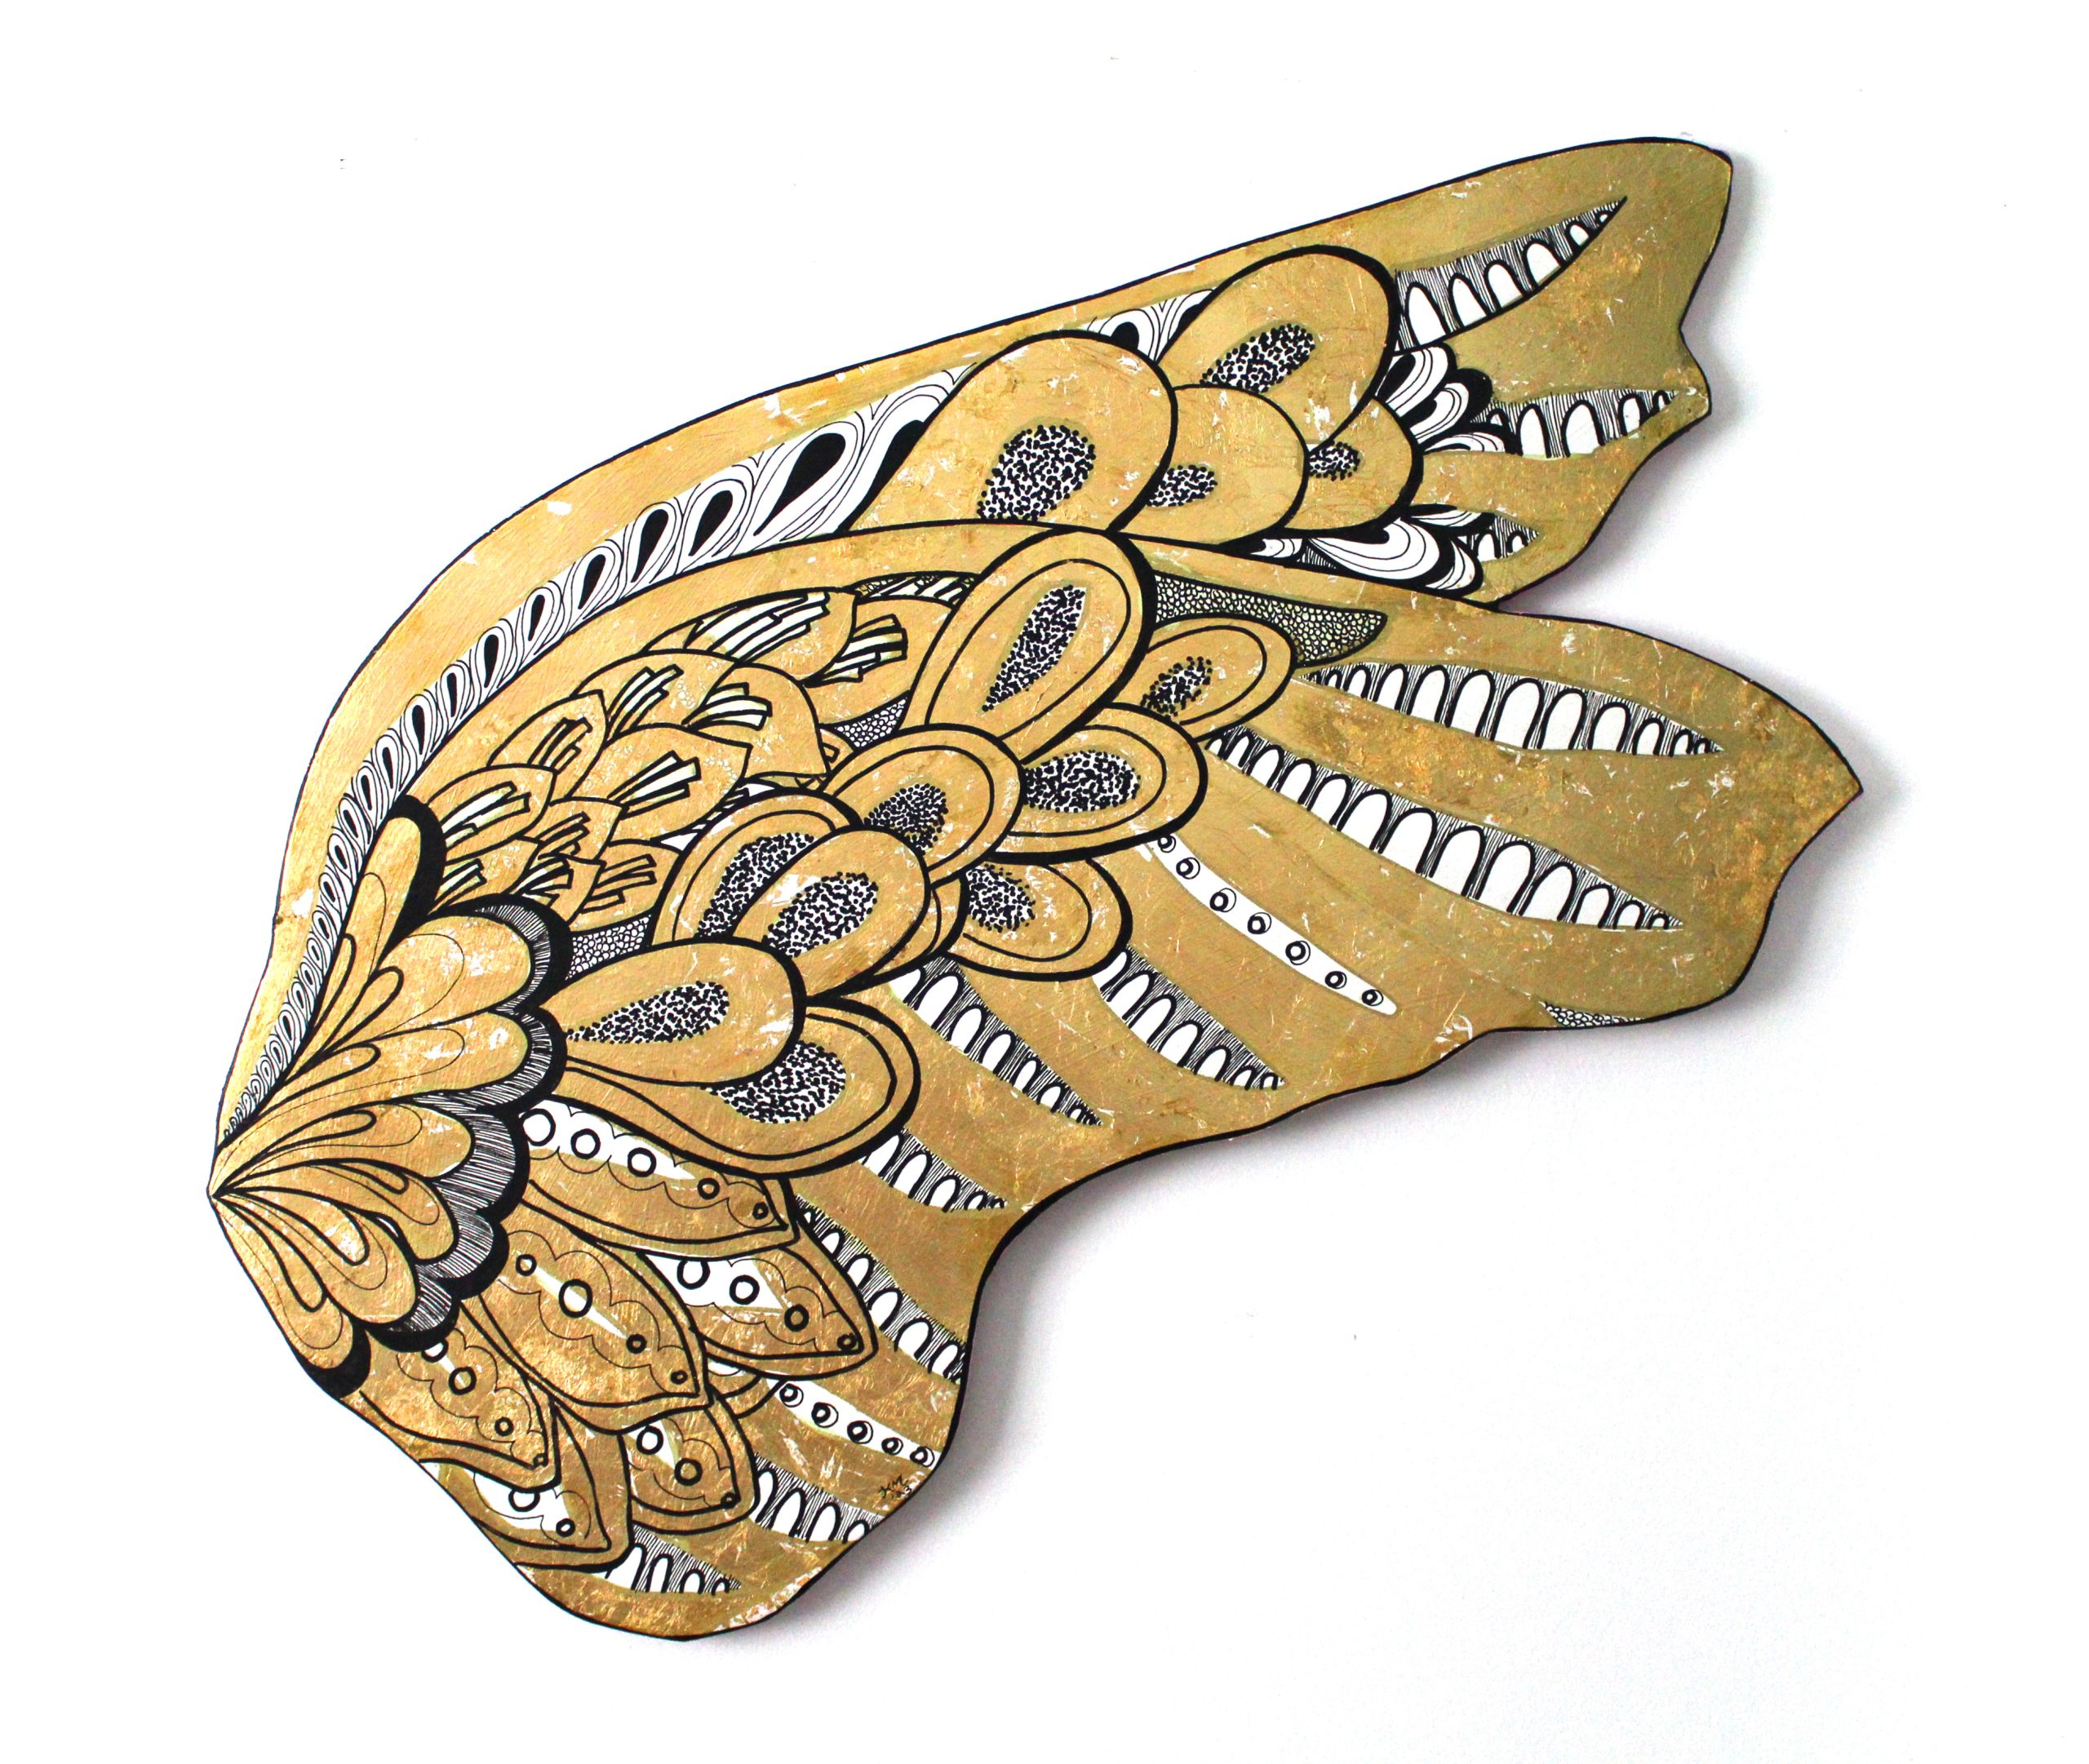 Distressed Gold Leaf Wings